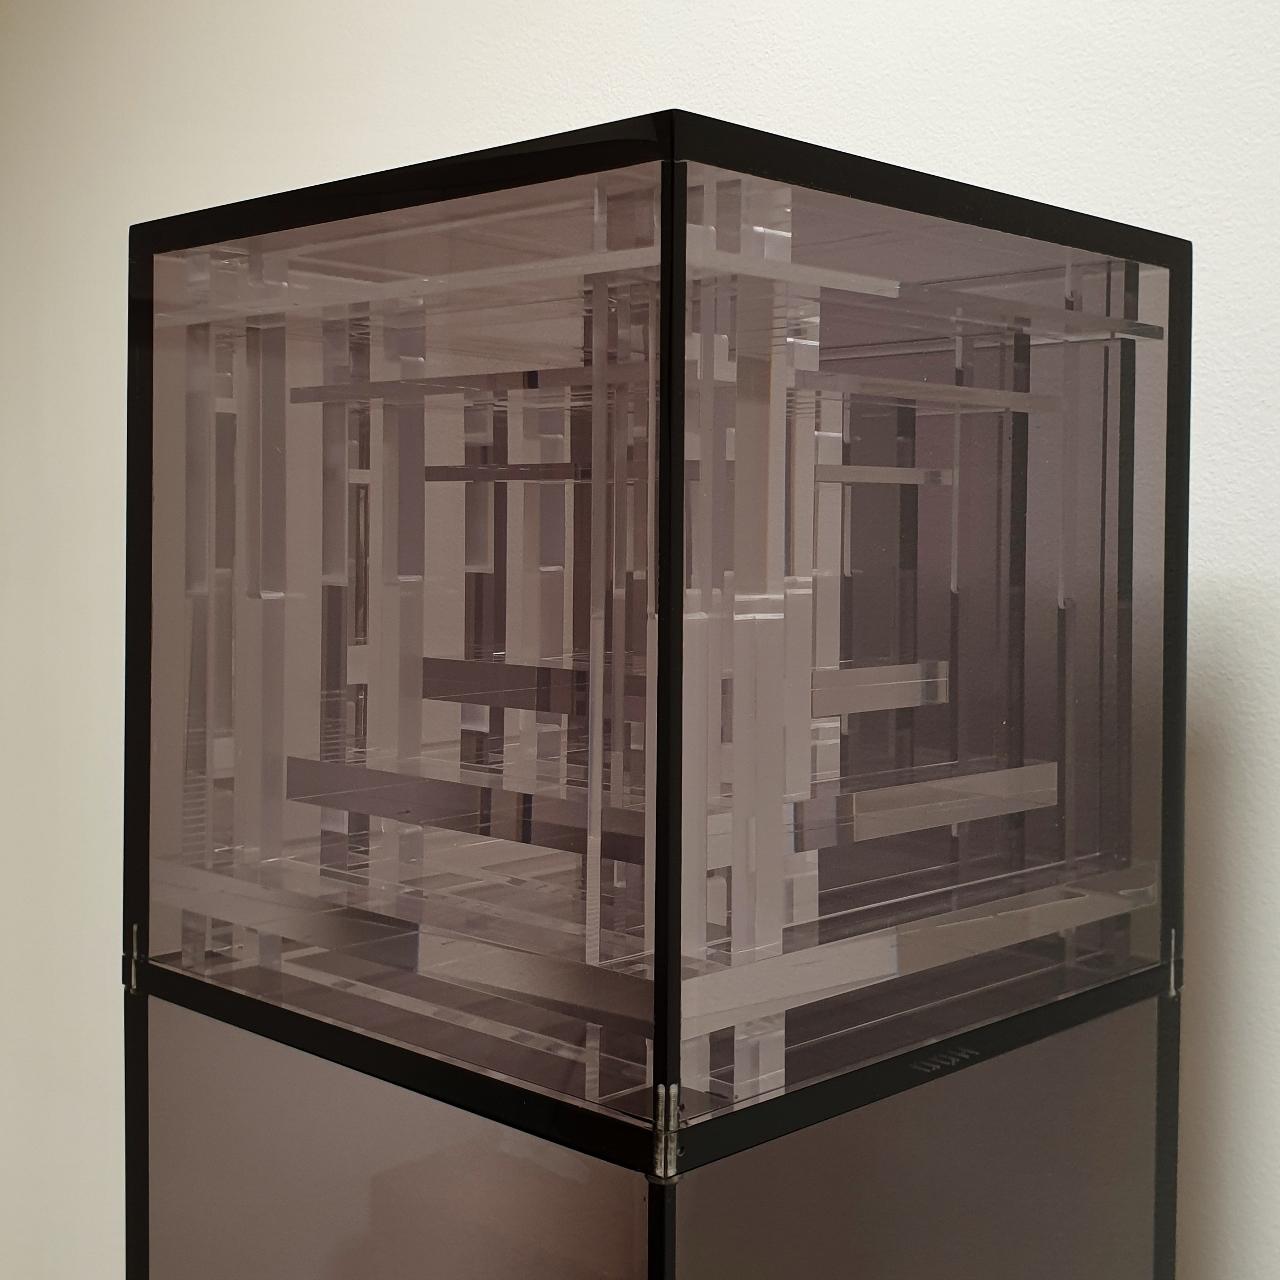 Homage to Bach is a unique large contemporary modern cube sculpture by the famous Dutch artist couple Nel Haringa and Fred Olijve. The cube sculpture consists of a few dozen hand cut hand polished plexiglass elements carefully stacked together